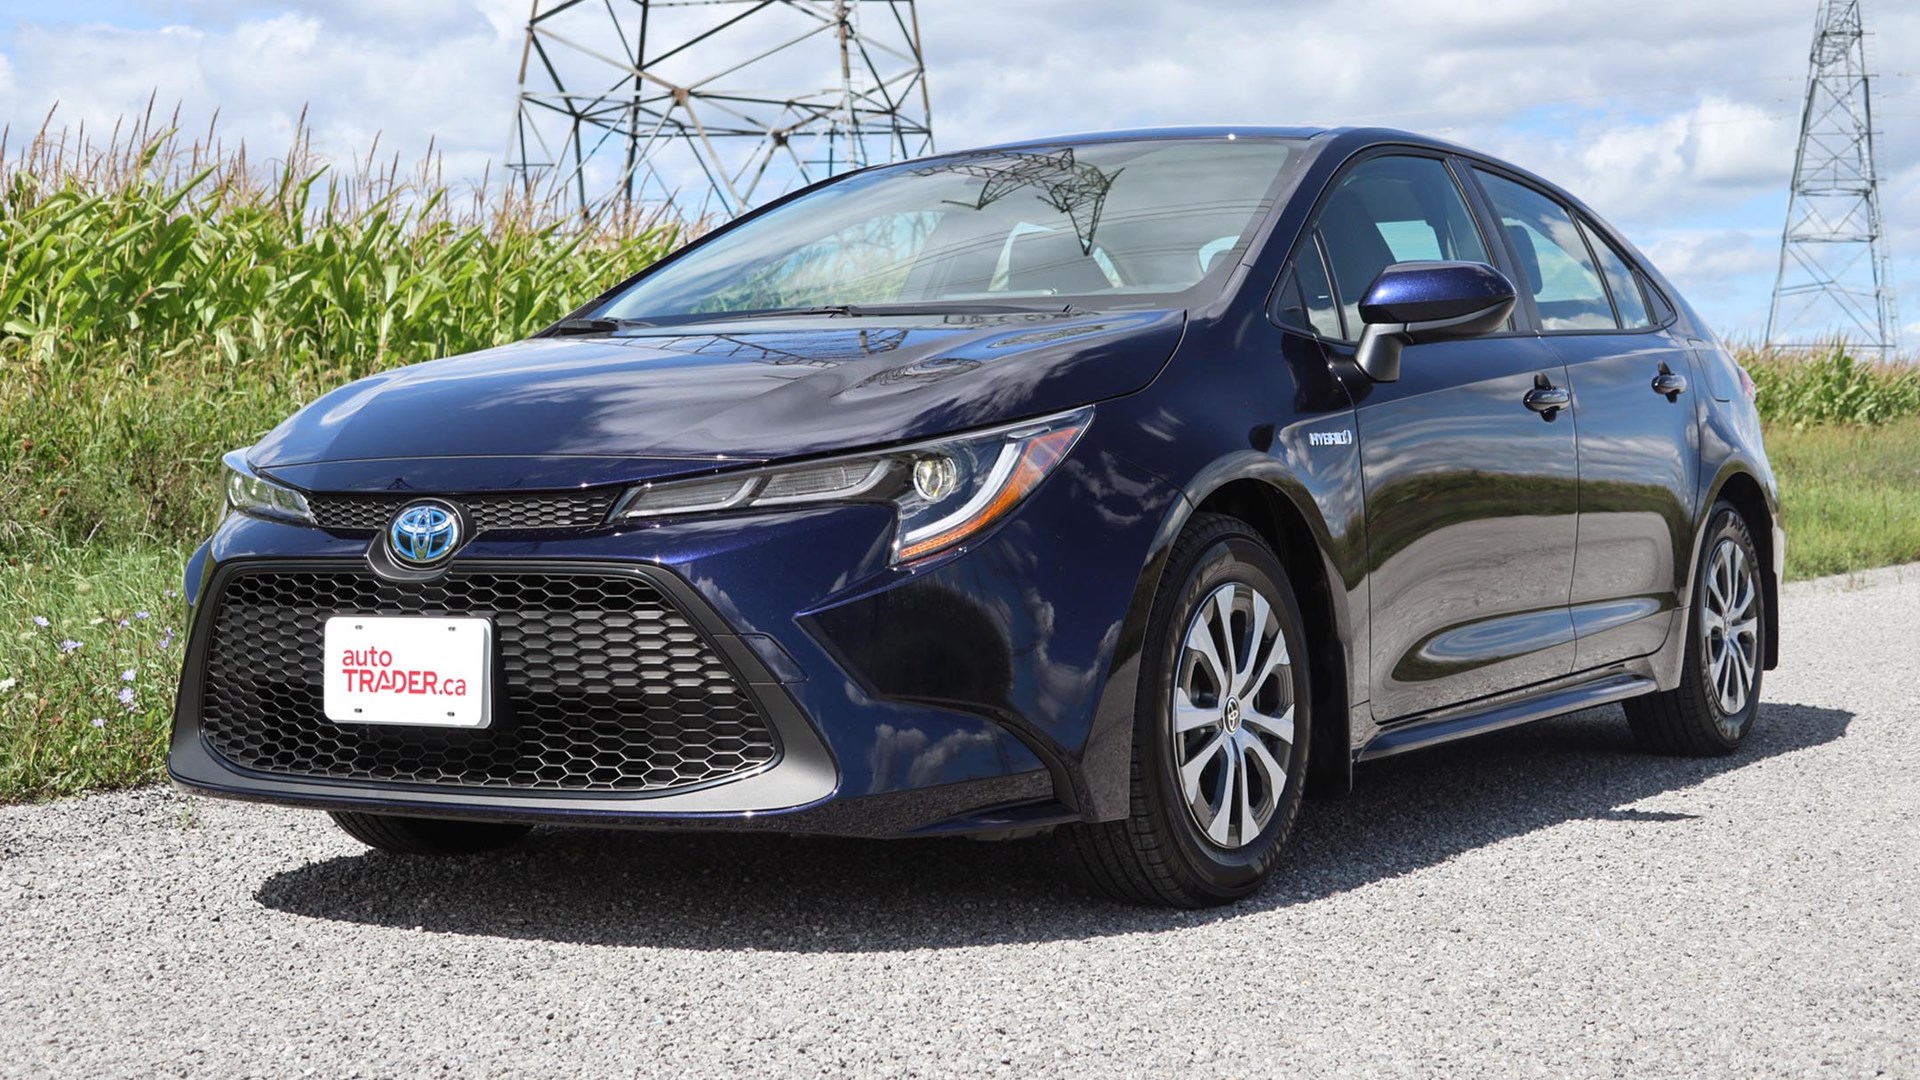 2021 Toyota Corolla Hybrid Review | AutoTrader.ca